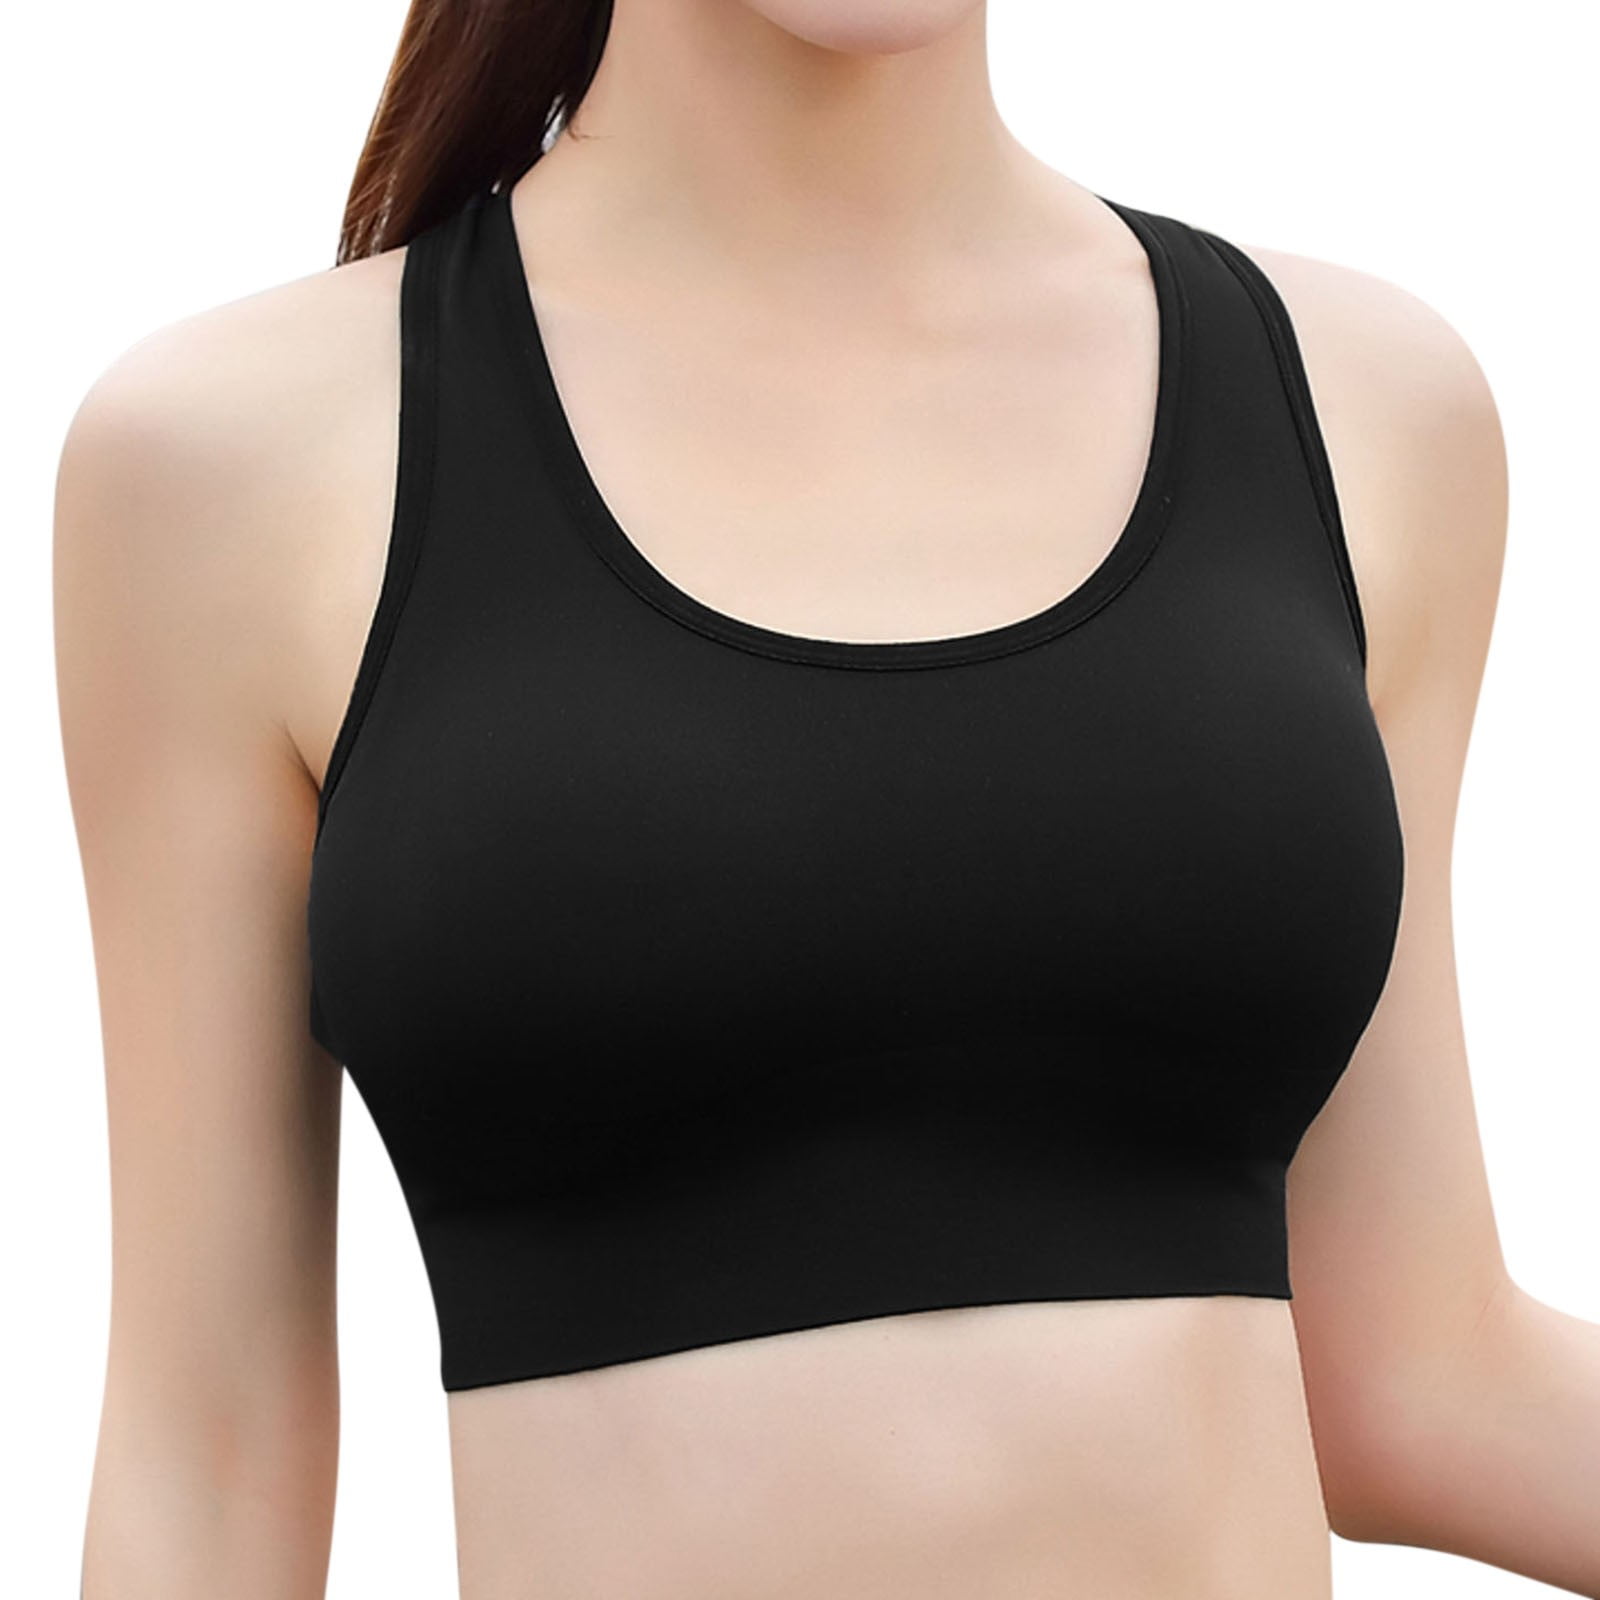 RUNNING GIRL Sports Bra for Women,High Impact Large Bust Padded Sports Bra  Fitness Workout Running Yoga Tank Tops(WX2888 Black M) at  Women's  Clothing store